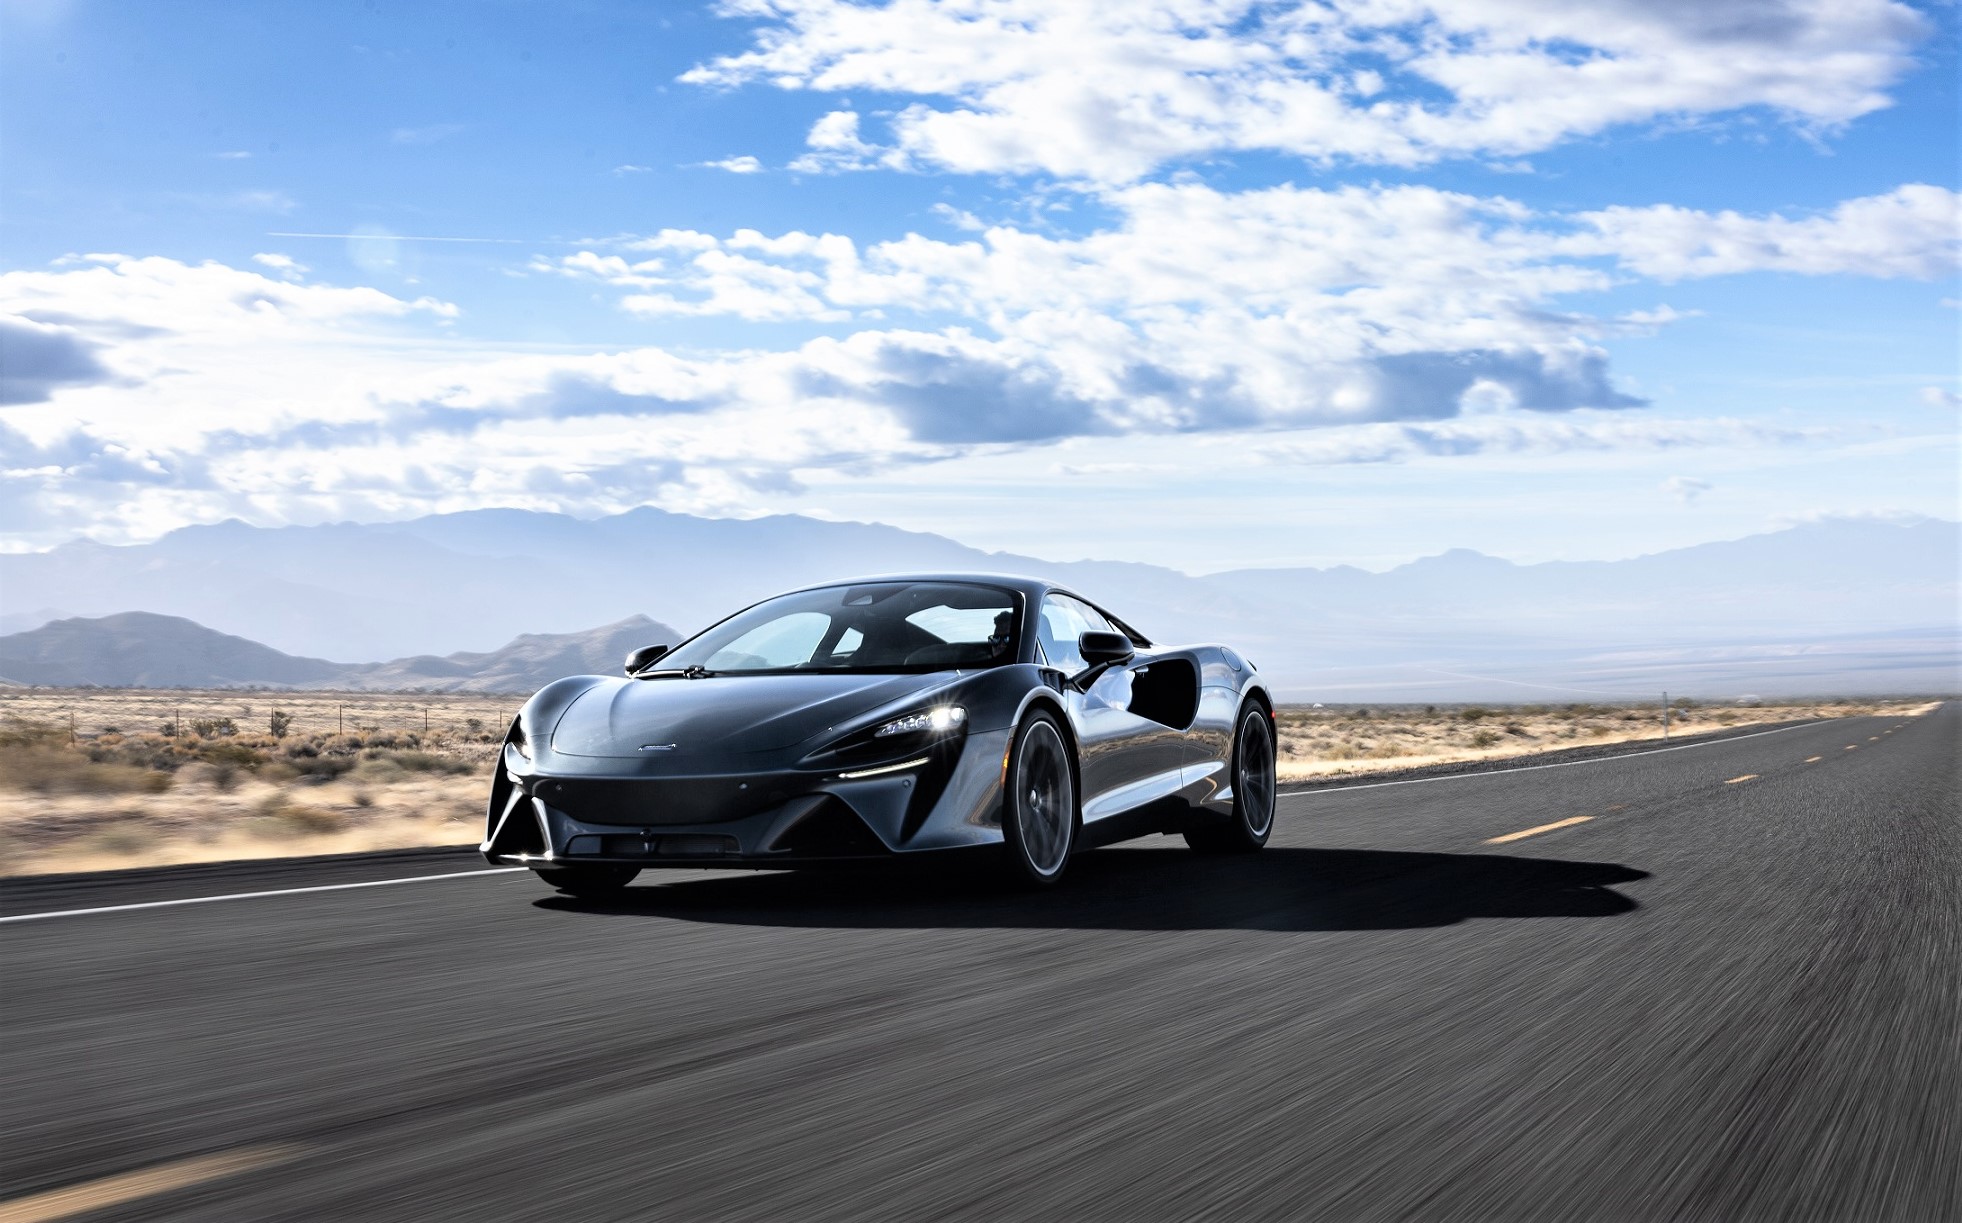 McLaren Artura captivates UAE car enthusiasts and displays its credentials ahead of first deliveries